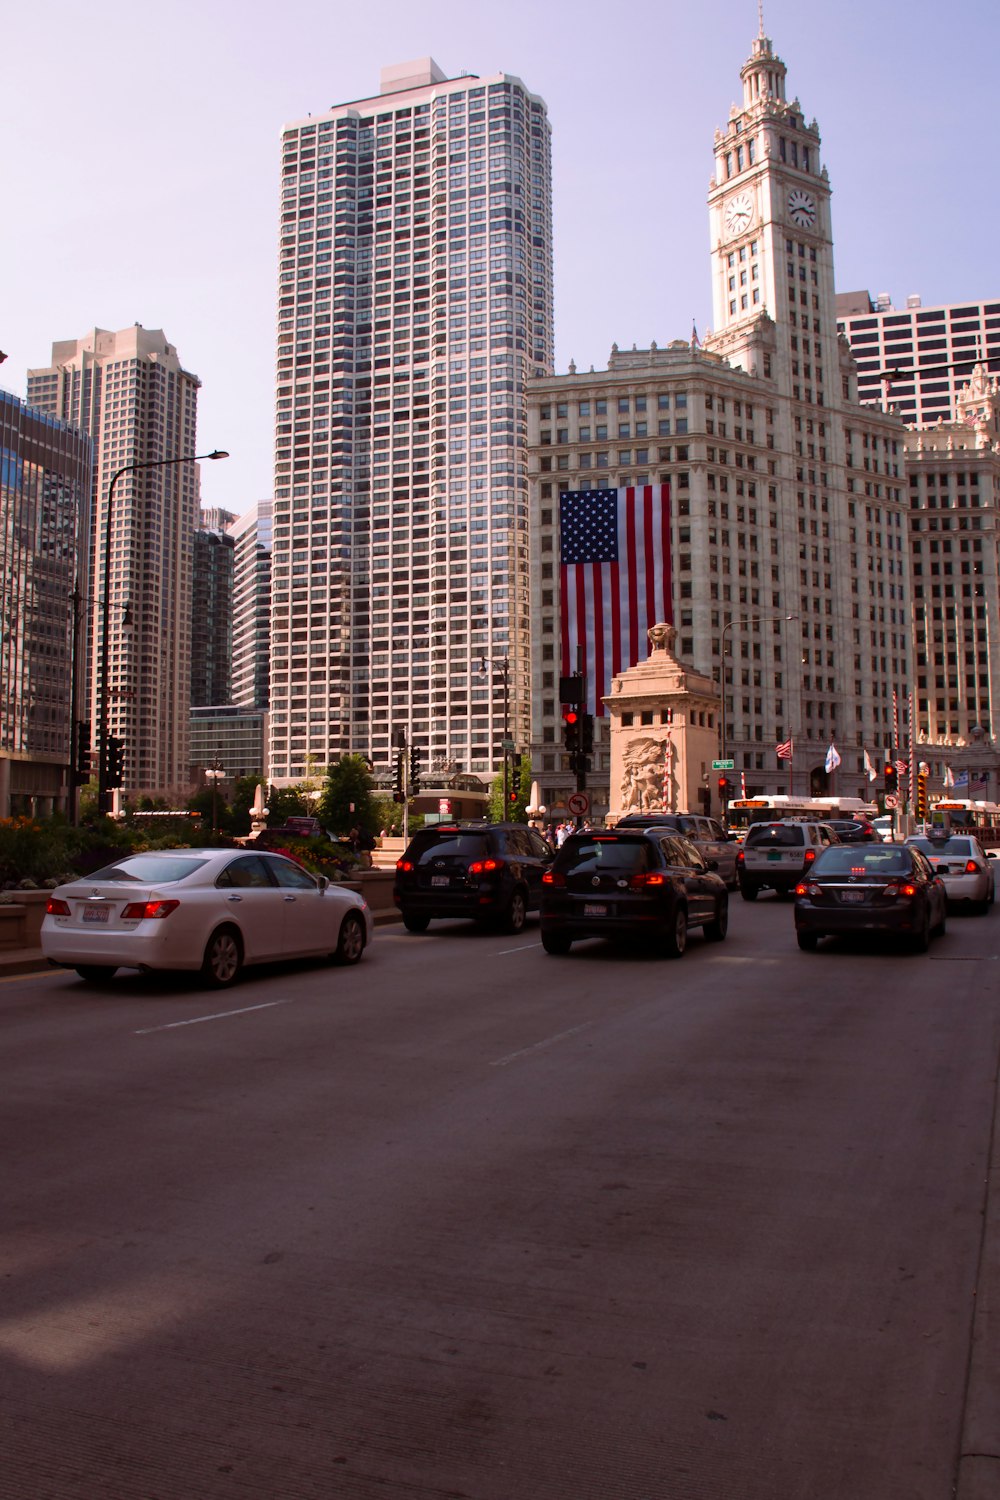 a city street filled with lots of traffic and tall buildings